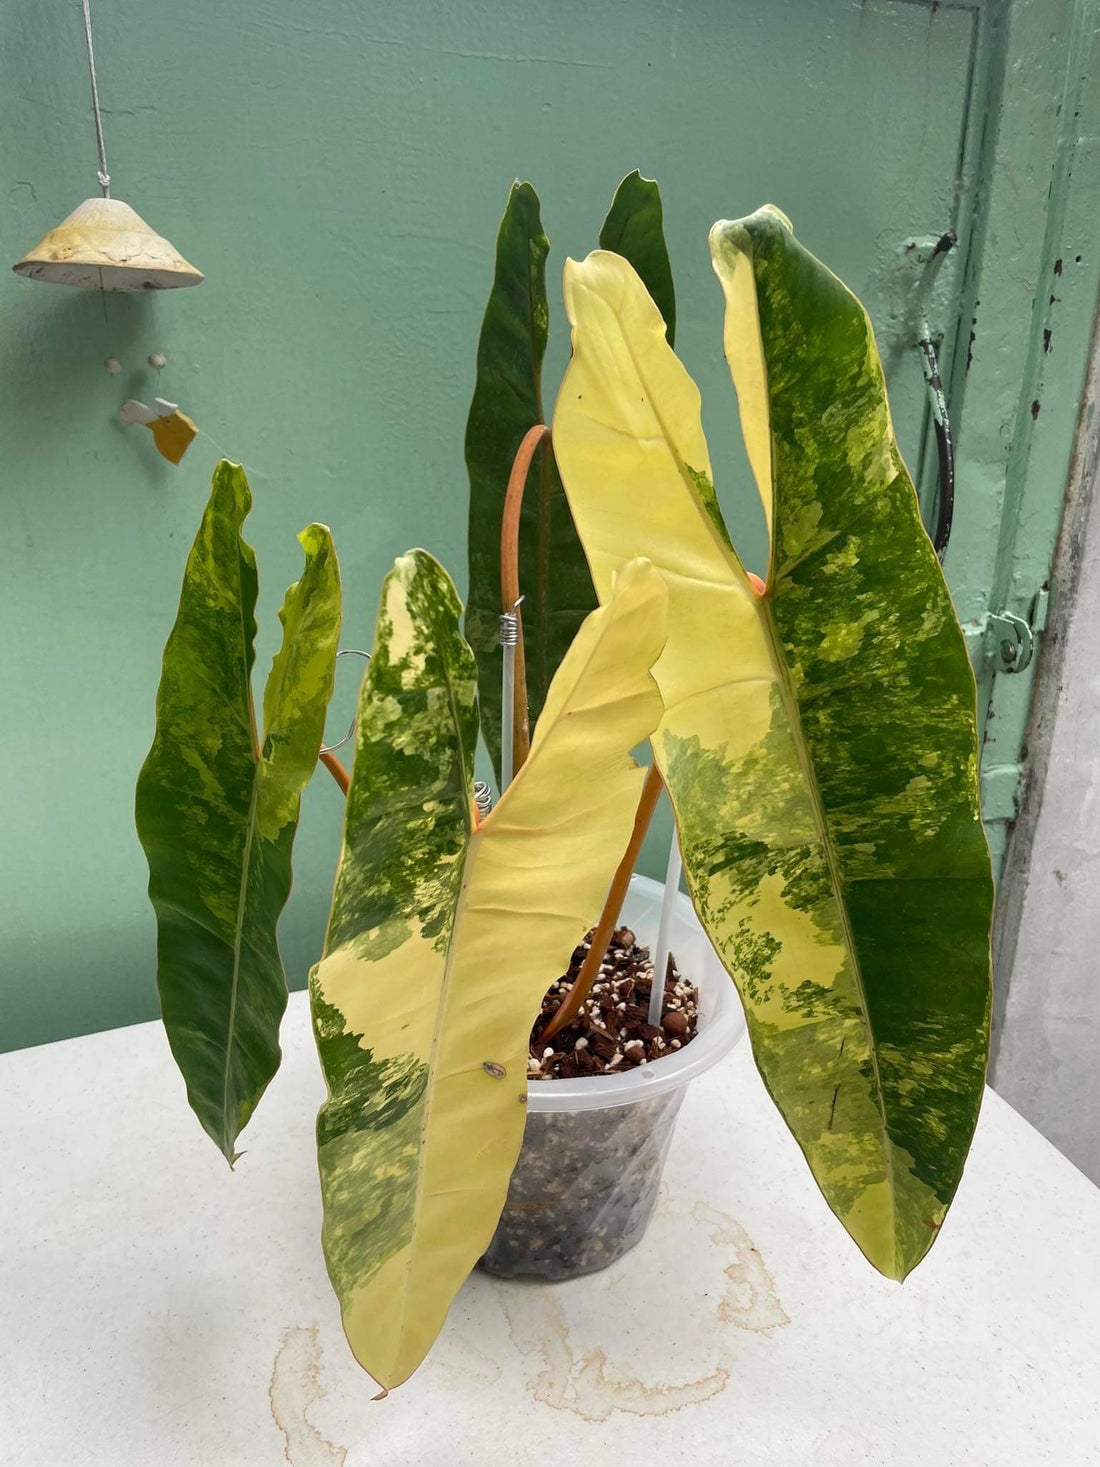 How can I make money by growing Philodendron billietiae variageted?